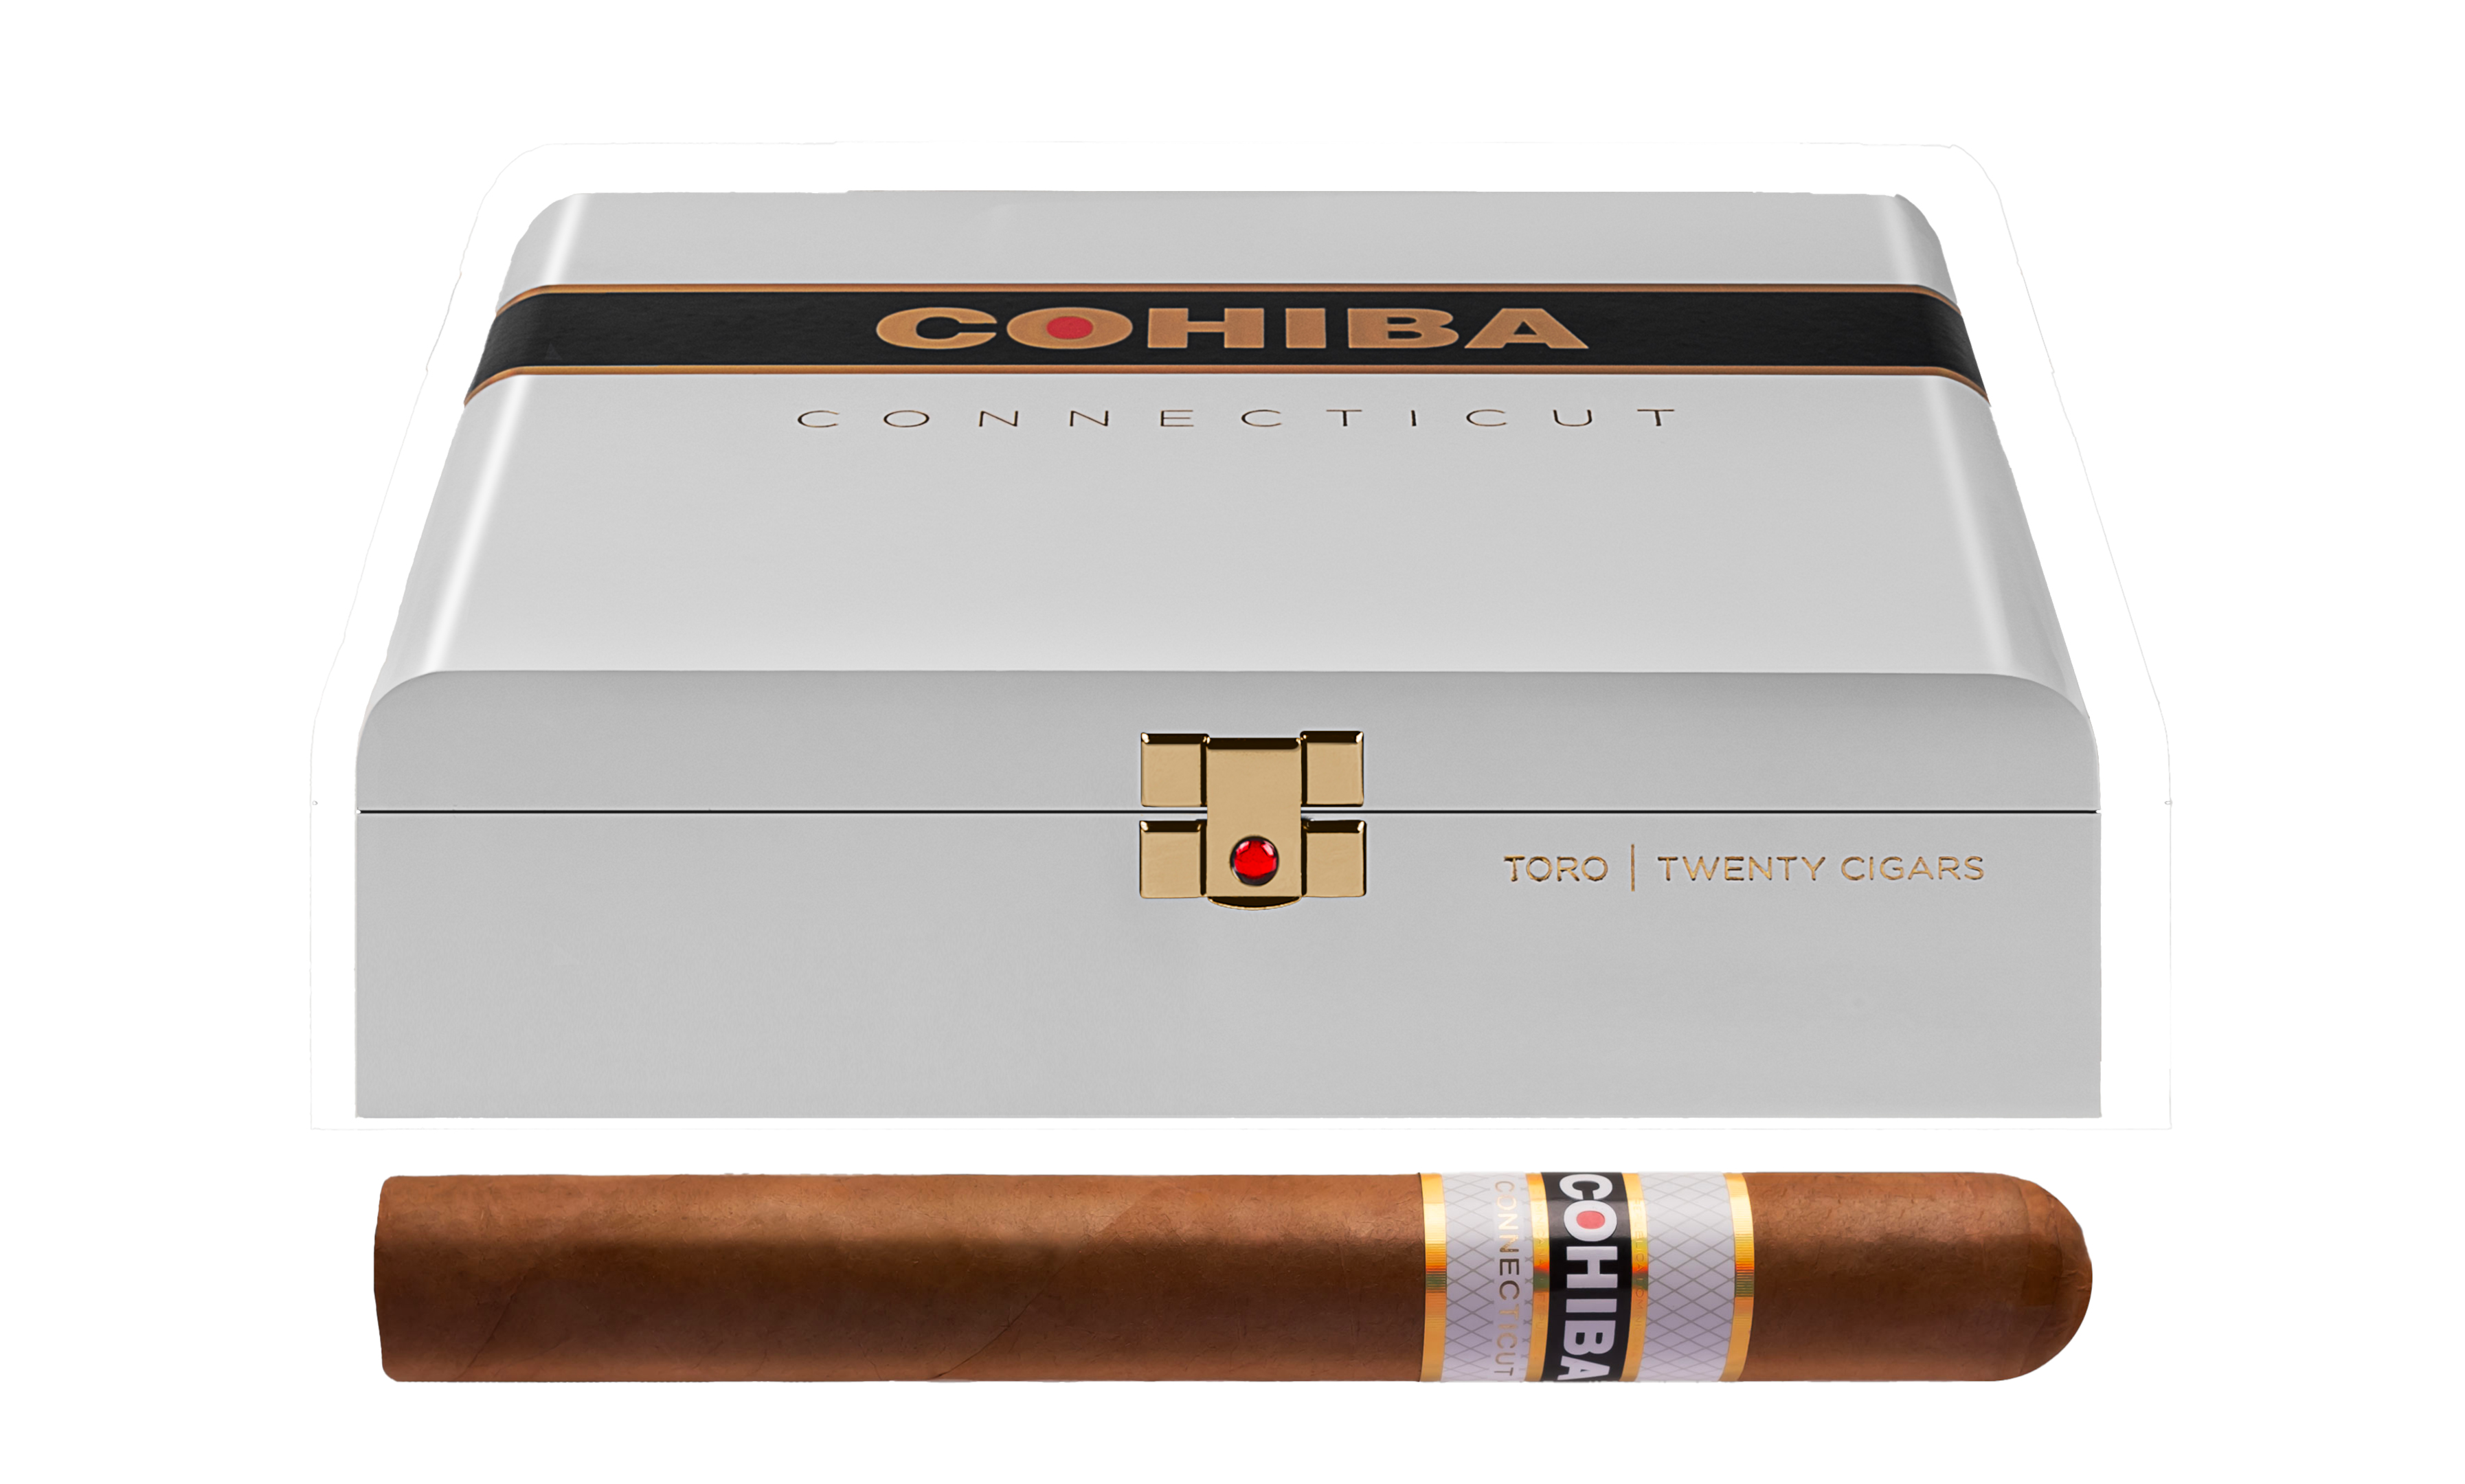 A box of Cohiba Connecticut cigars from EU member countries